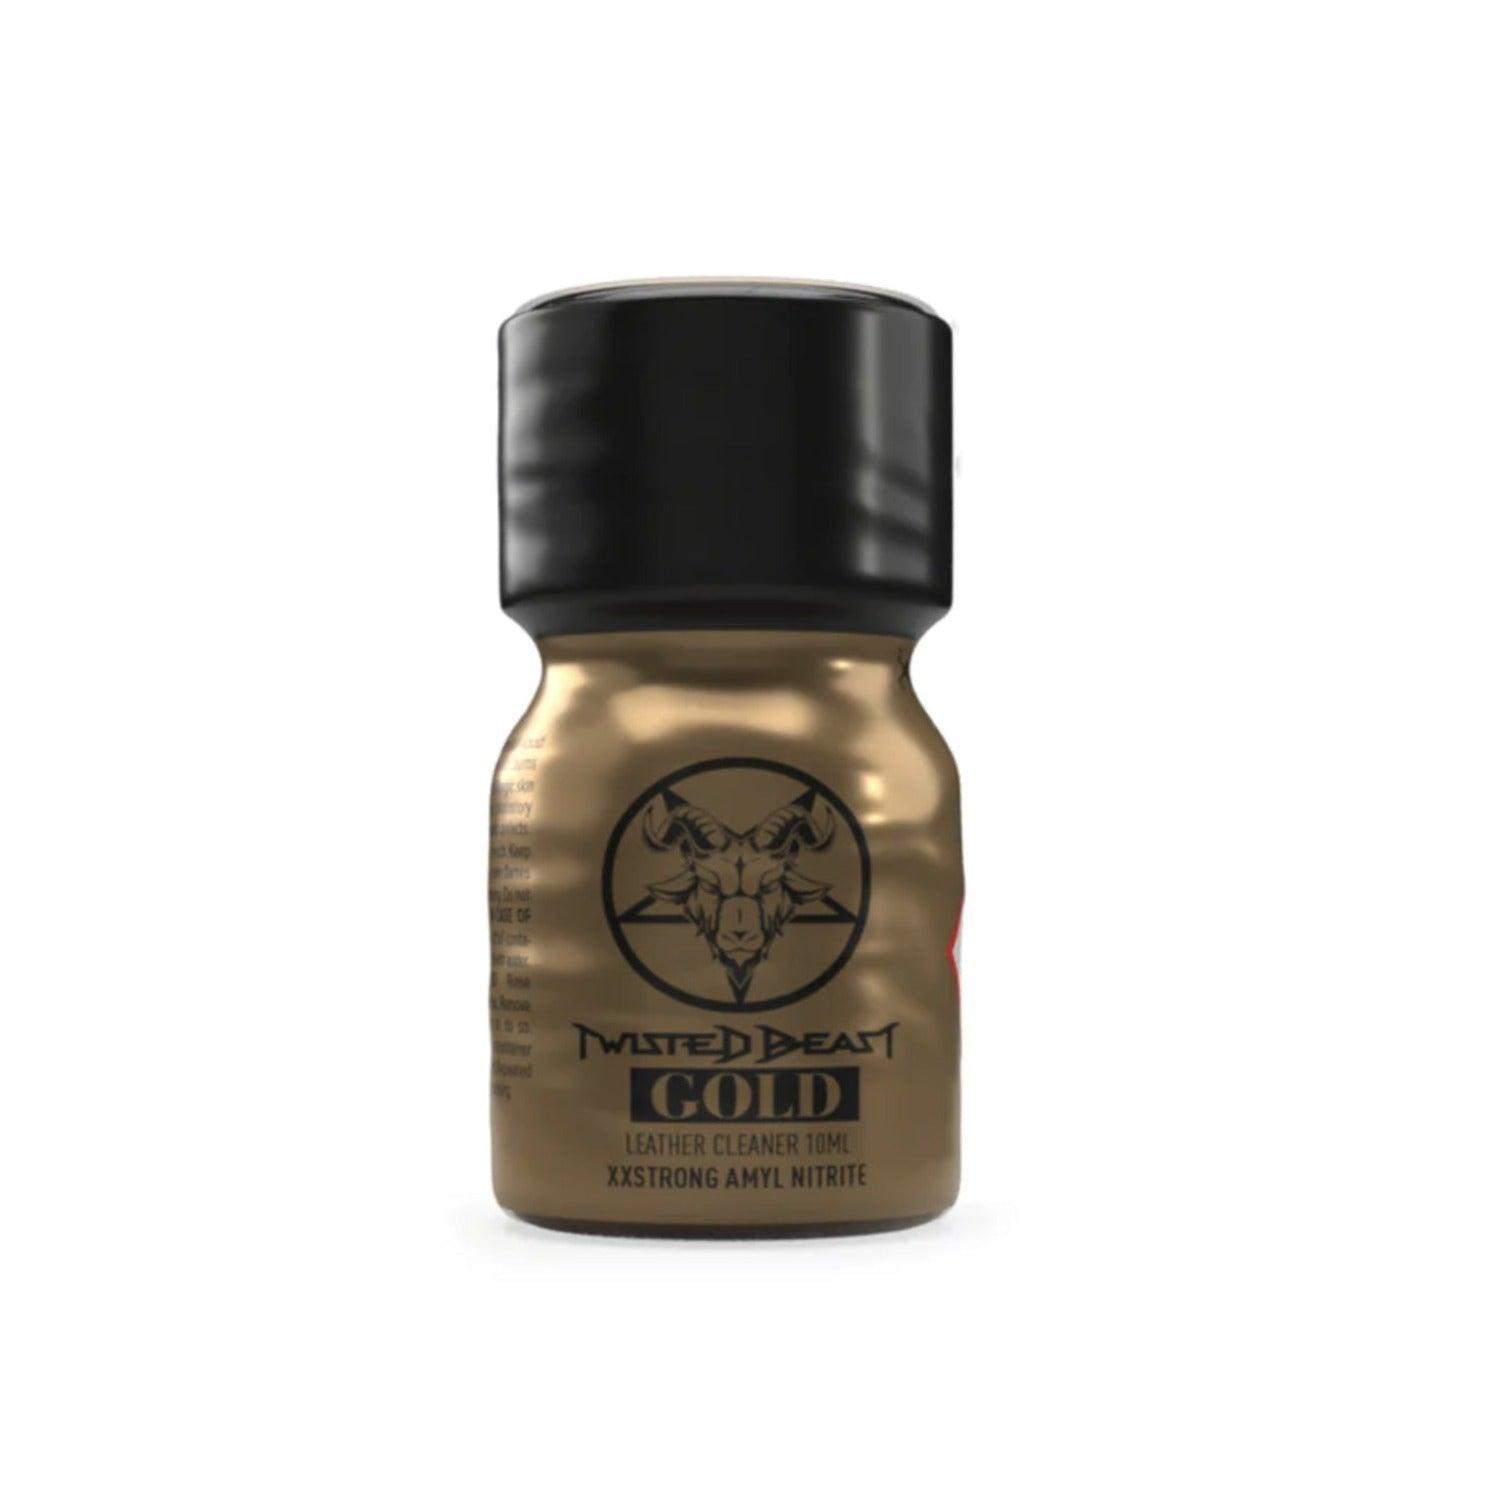 Twisted Beast Gold, 10ml by Twisted Beast